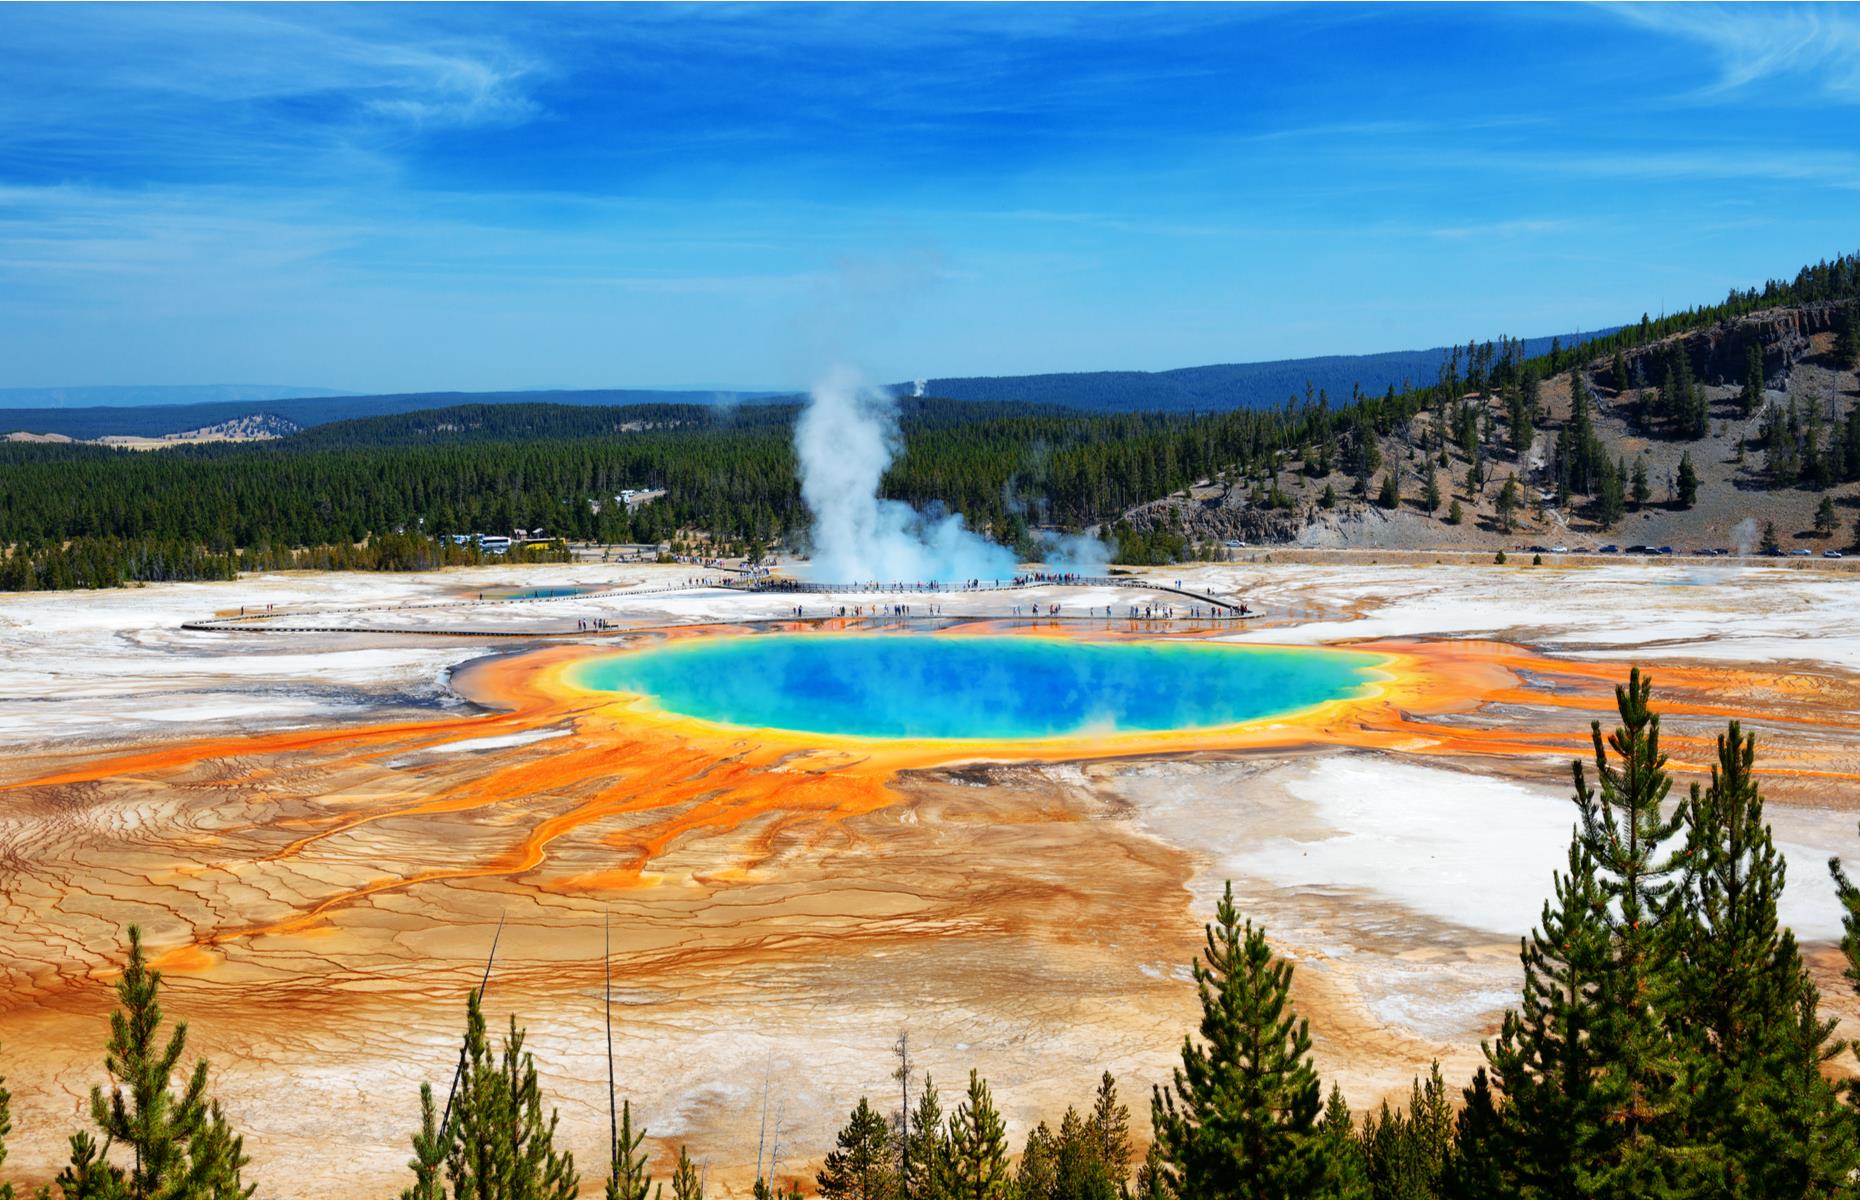 <p>The first of America's national parks, <a href="https://www.nps.gov/yell/index.htm">Yellowstone</a> has been beguiling visitors with the power of Mother Nature since 1872. It's a park packed to the gills with natural wonders, from the rainbow-like Grand Prismatic Spring (look down on it from the popular Grand Prismatic Overlook Trail) to the regularly erupting Old Faithful Geyser. It's also a habitat for some 67 species of mammal, from black and grizzly bears to bobcats and bison.</p>  <p><a href="https://www.loveexploring.com/galleryextended/79246/alternative-america-101-lesservisited-places-everyone-should-see?page=1"><strong>Alternative America: 101 lesser-known attractions for your bucket list</strong></a></p>